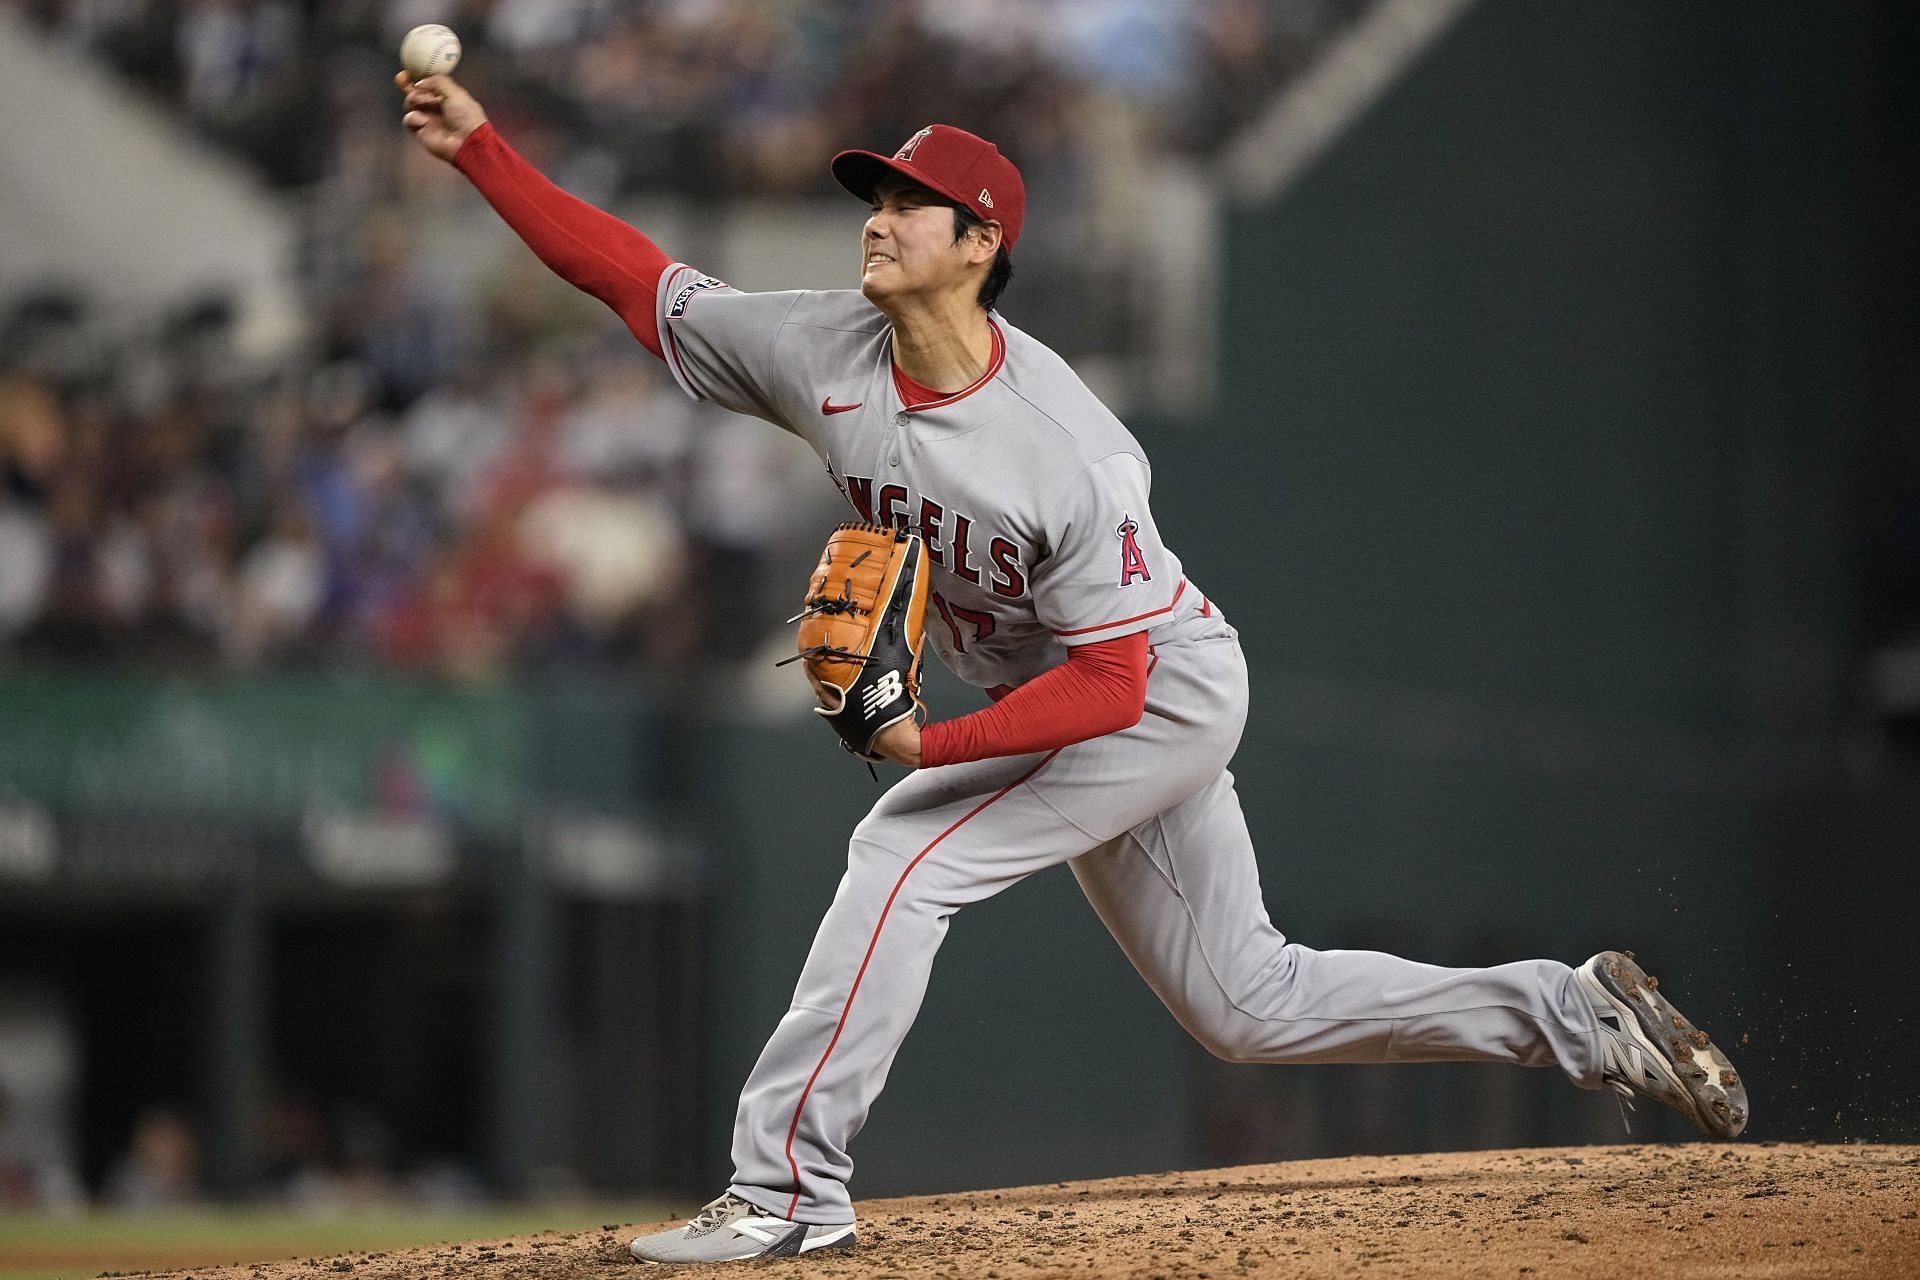 Shohei Ohtani is coming for the MVP